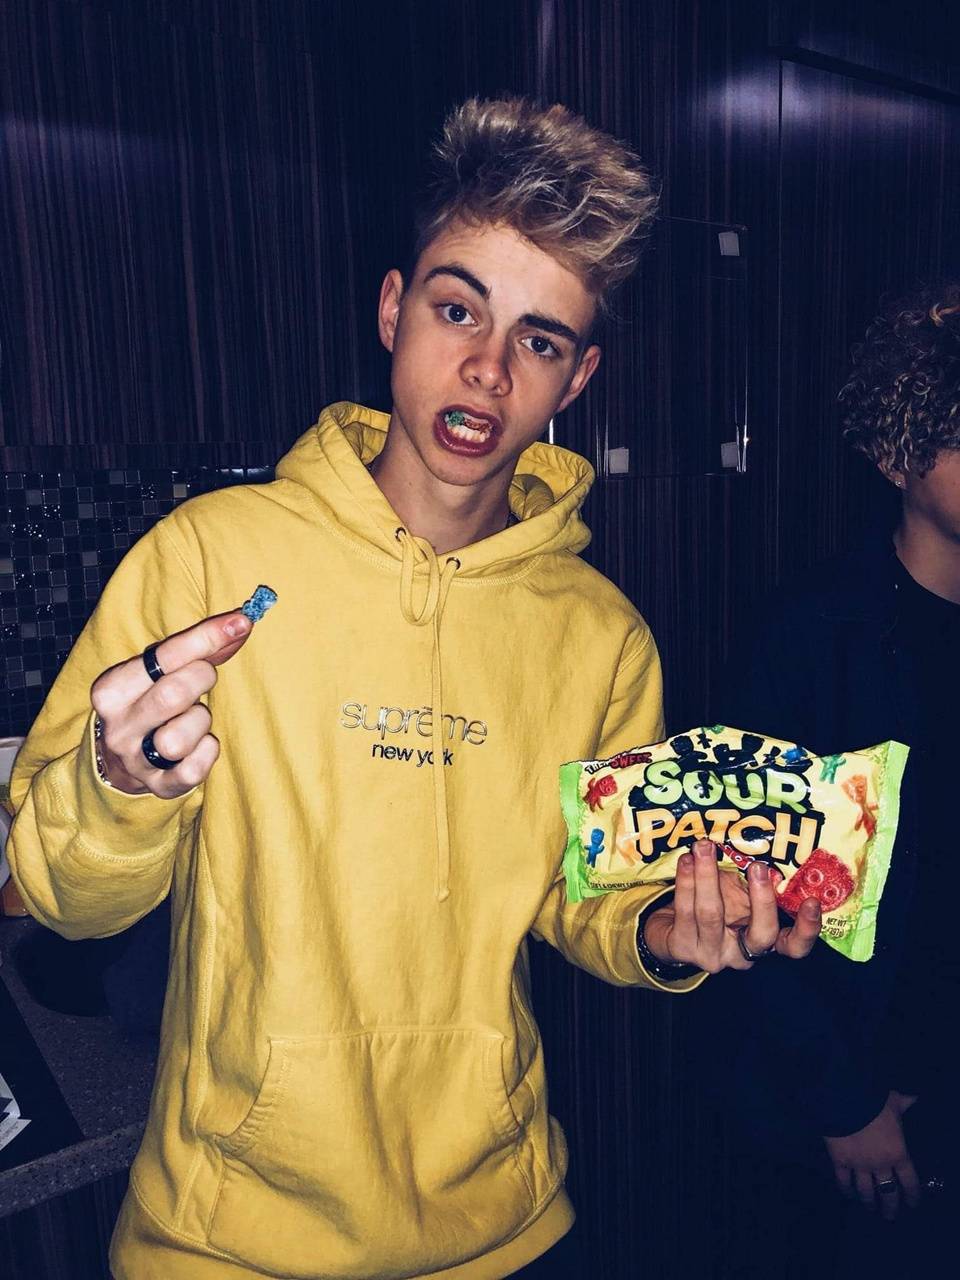 Corbyn Besson Smiling Wallpapers